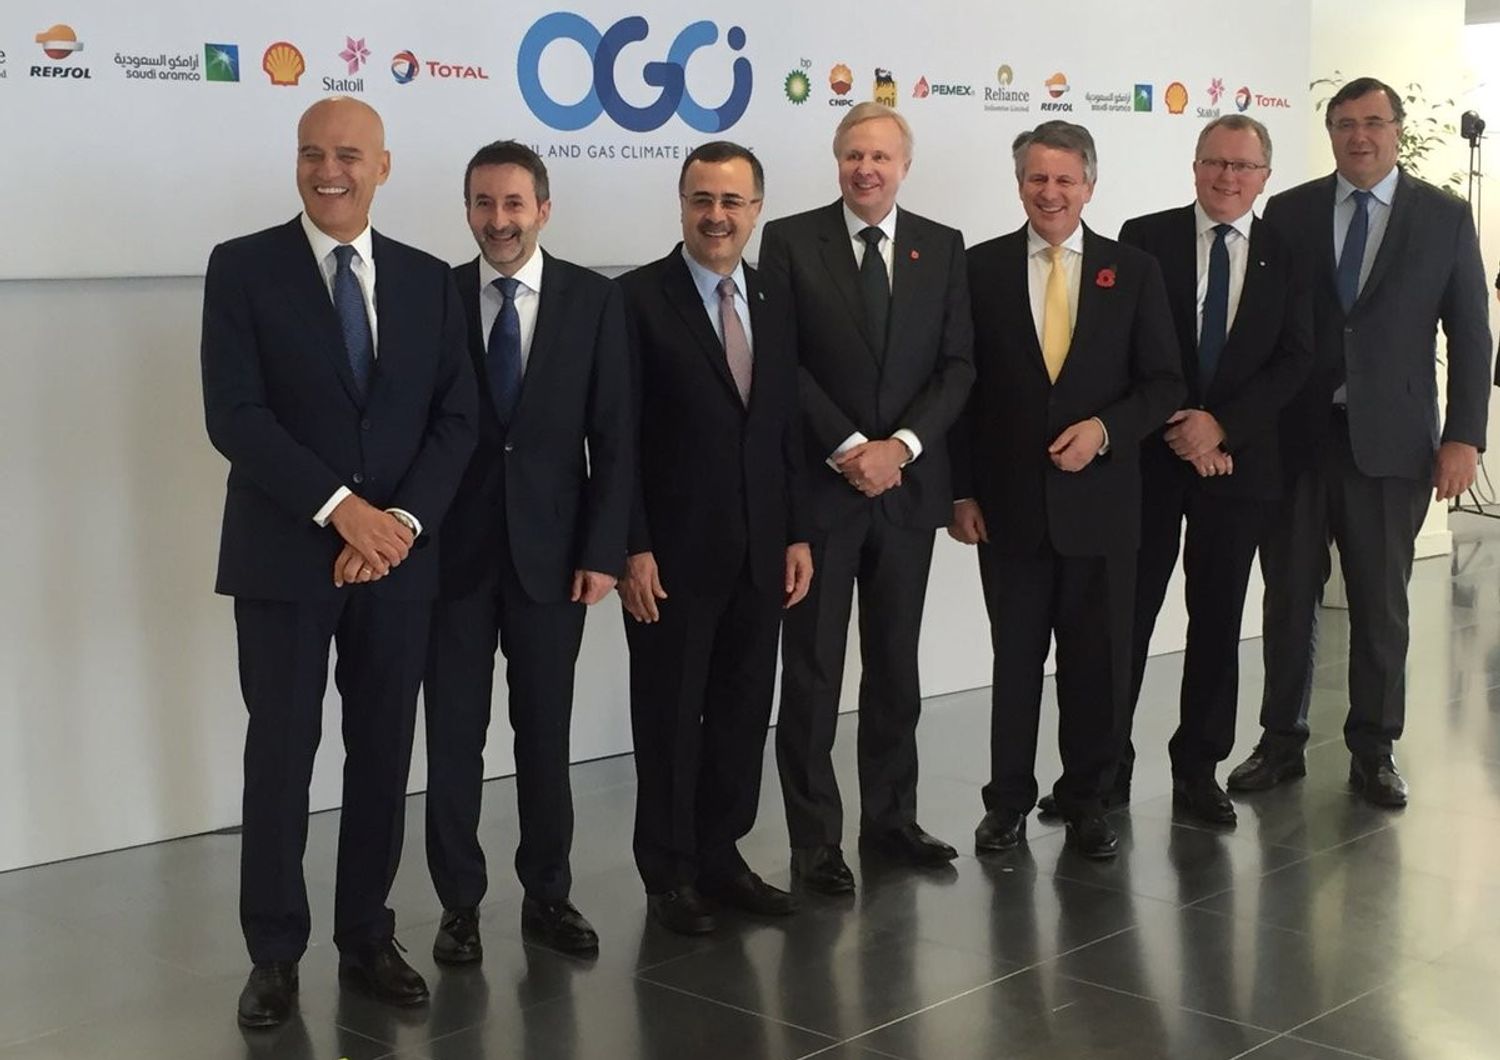 &nbsp;Eni Descalzi #OGCI Climate Investment&nbsp;Oil and Gas Climate Initiative (twitter)